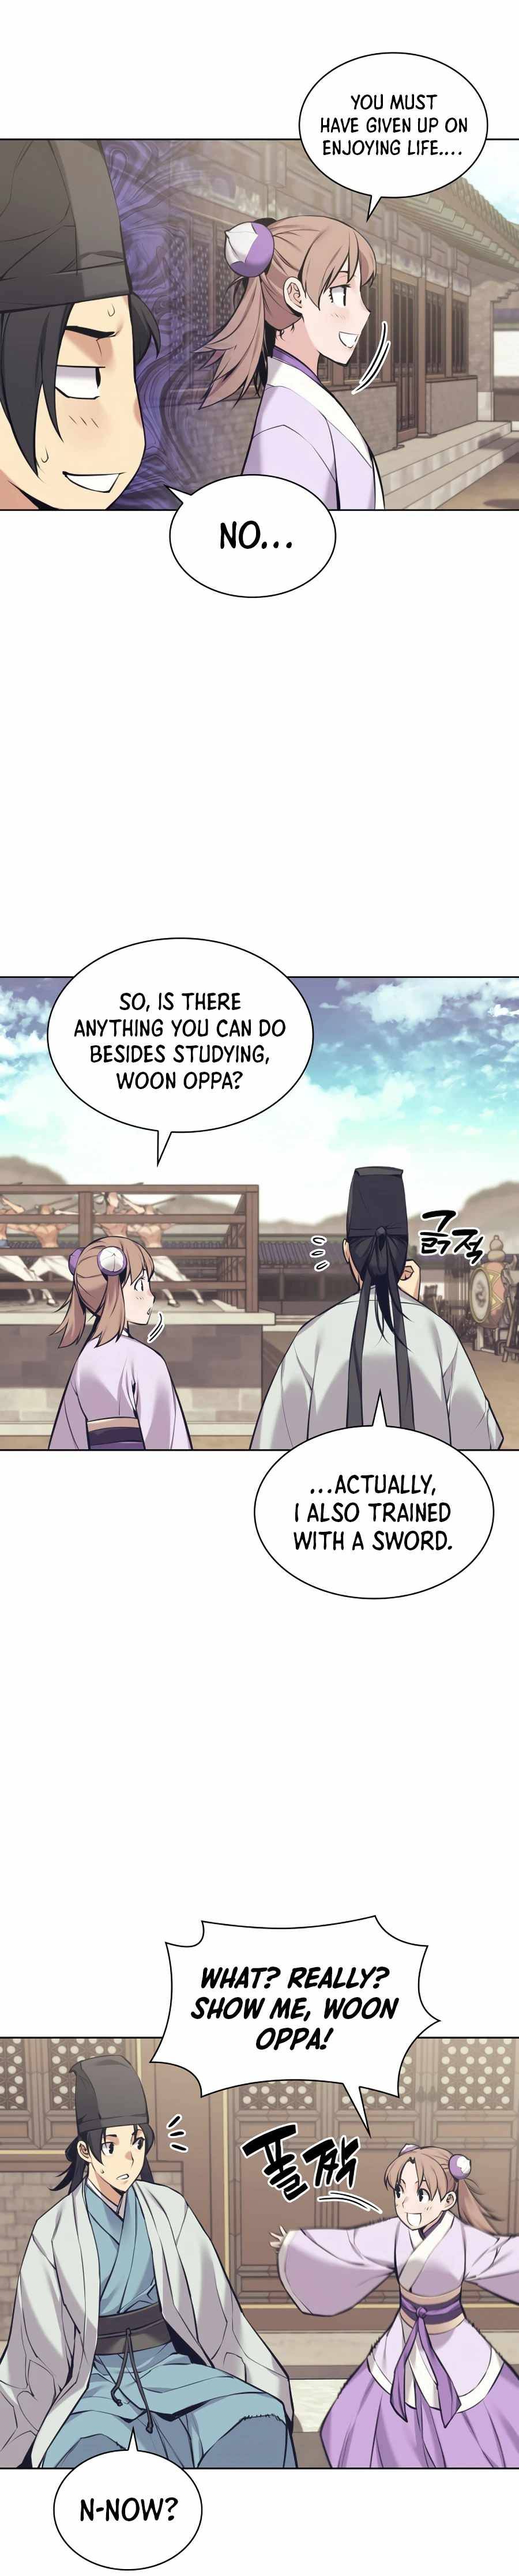 Records of the Swordsman Scholar chapter 12